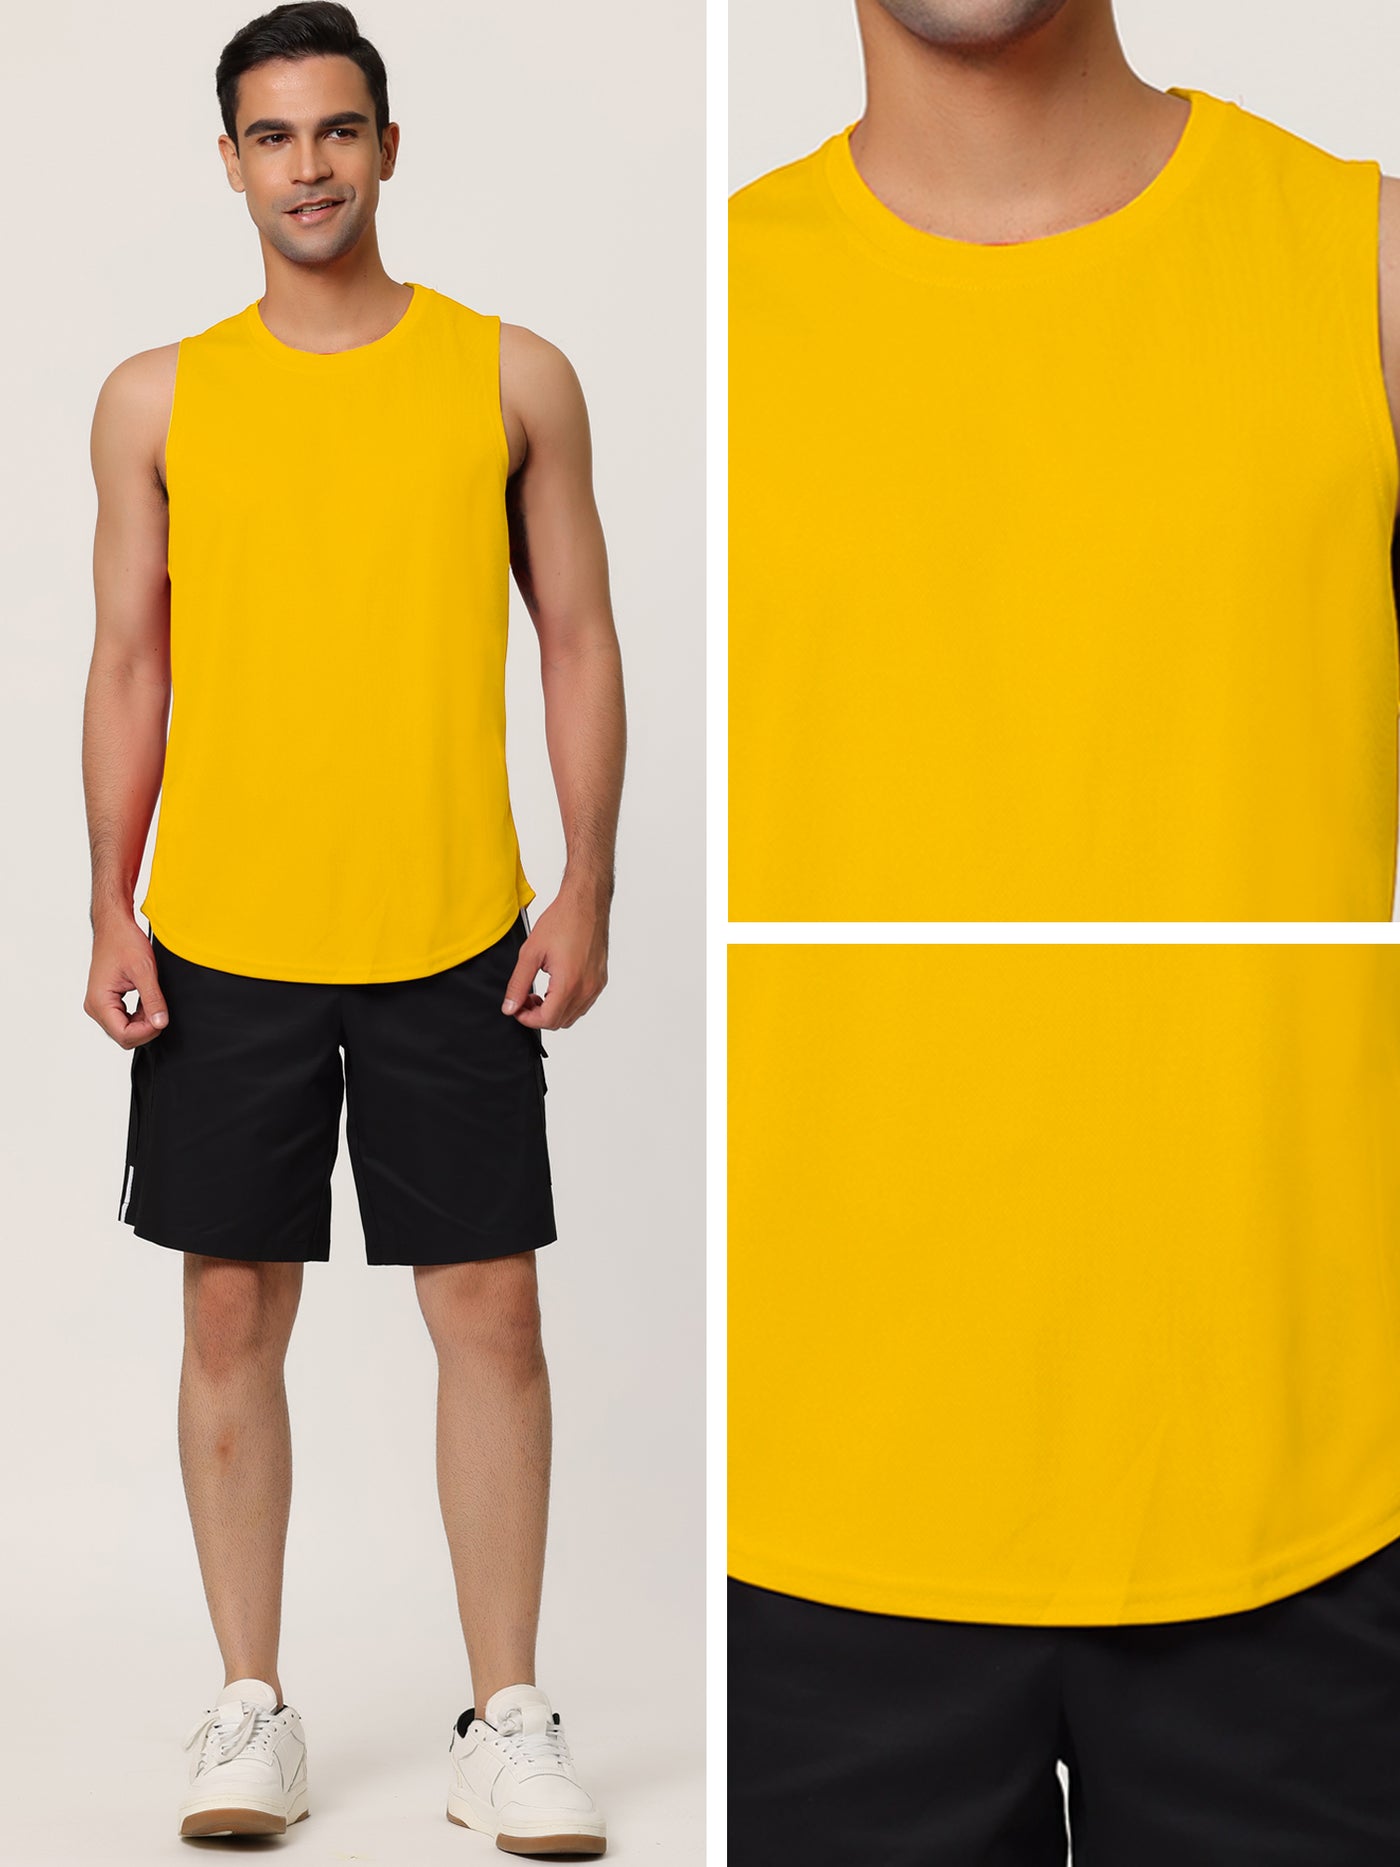 Bublédon Gym Tank Tops for Men's Sleeveless Fitness Muscle Sport Workout T-Shirts